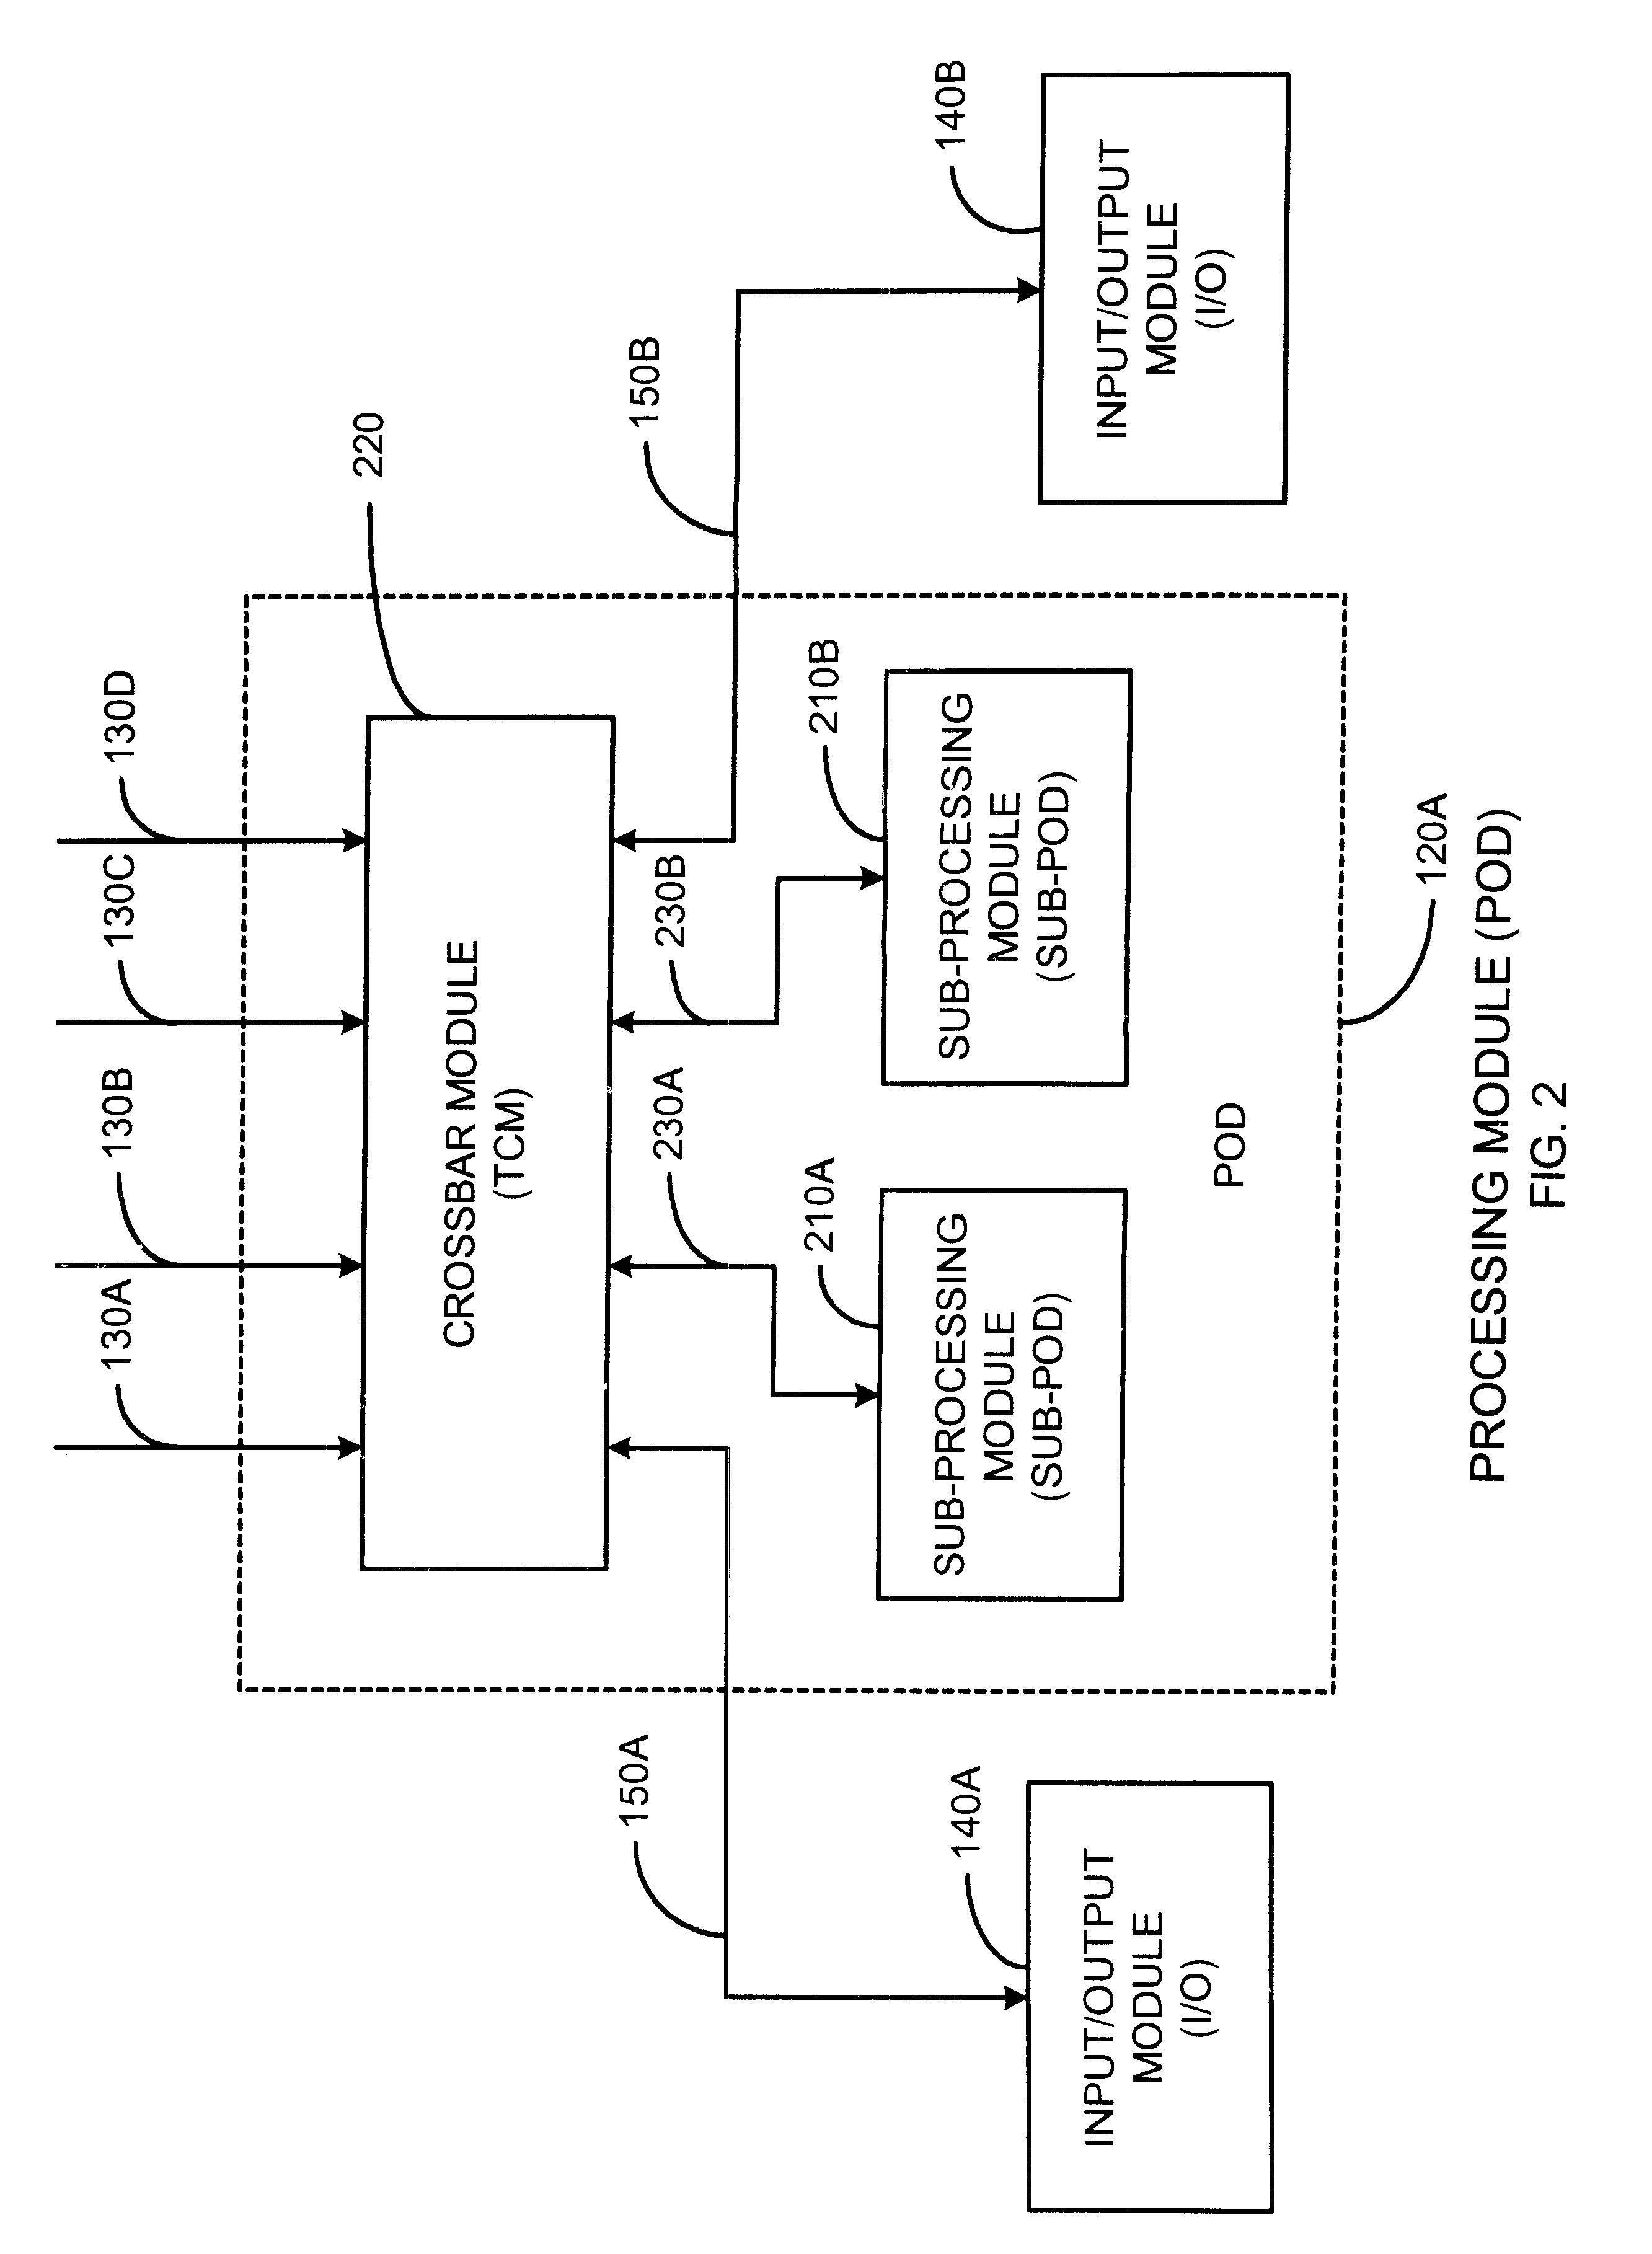 High-speed memory storage unit for a multiprocessor system having integrated directory and data storage subsystems